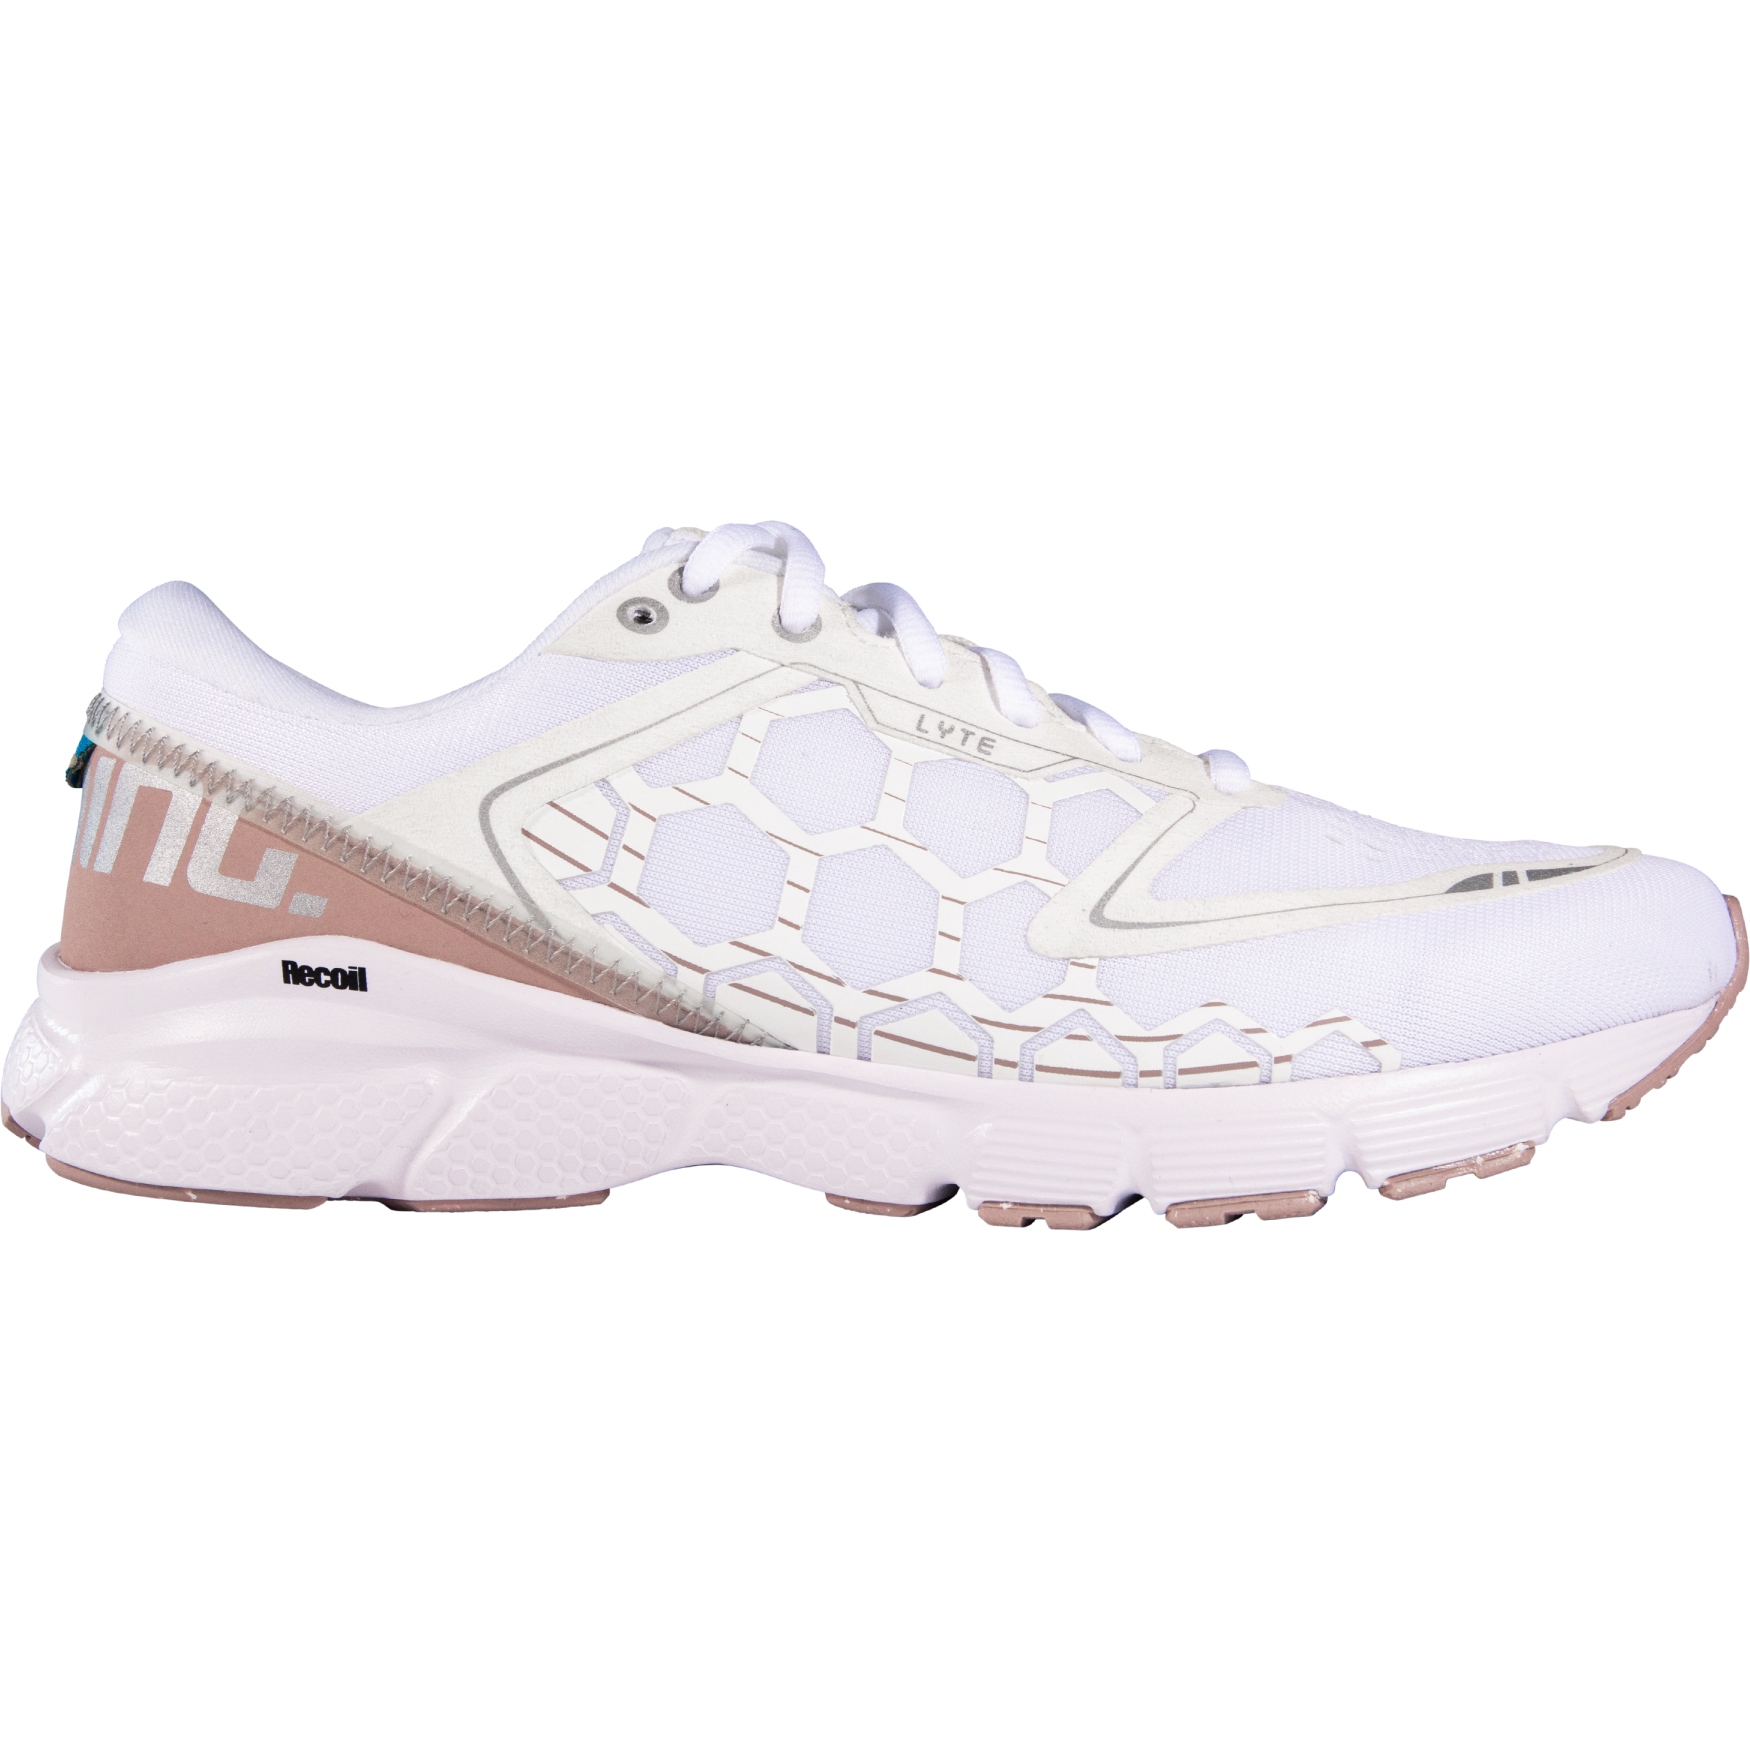 Picture of Salming Recoil Lyte Shoes Women - White/Beige